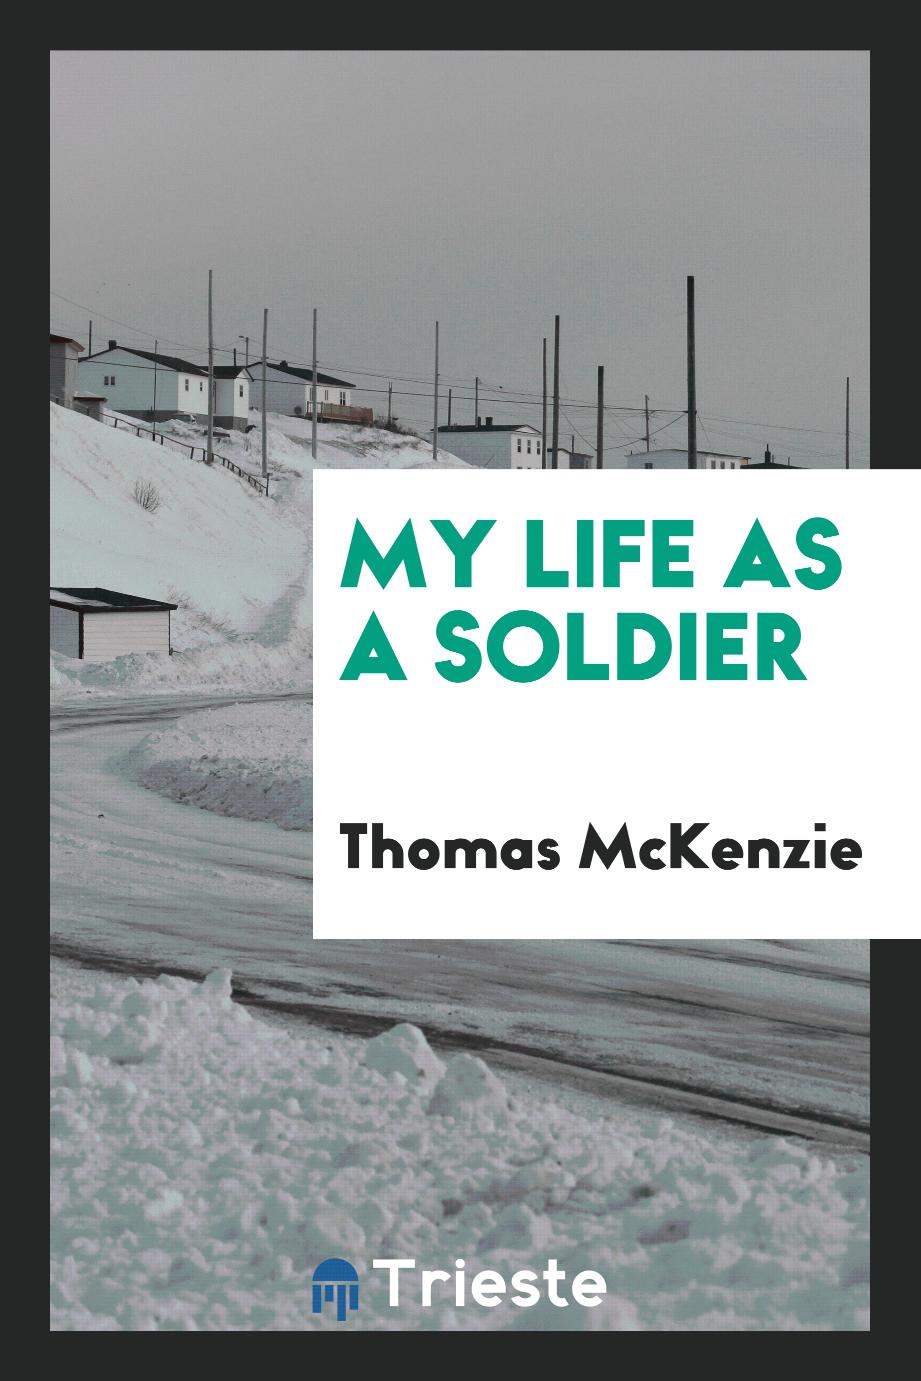 My life as a soldier